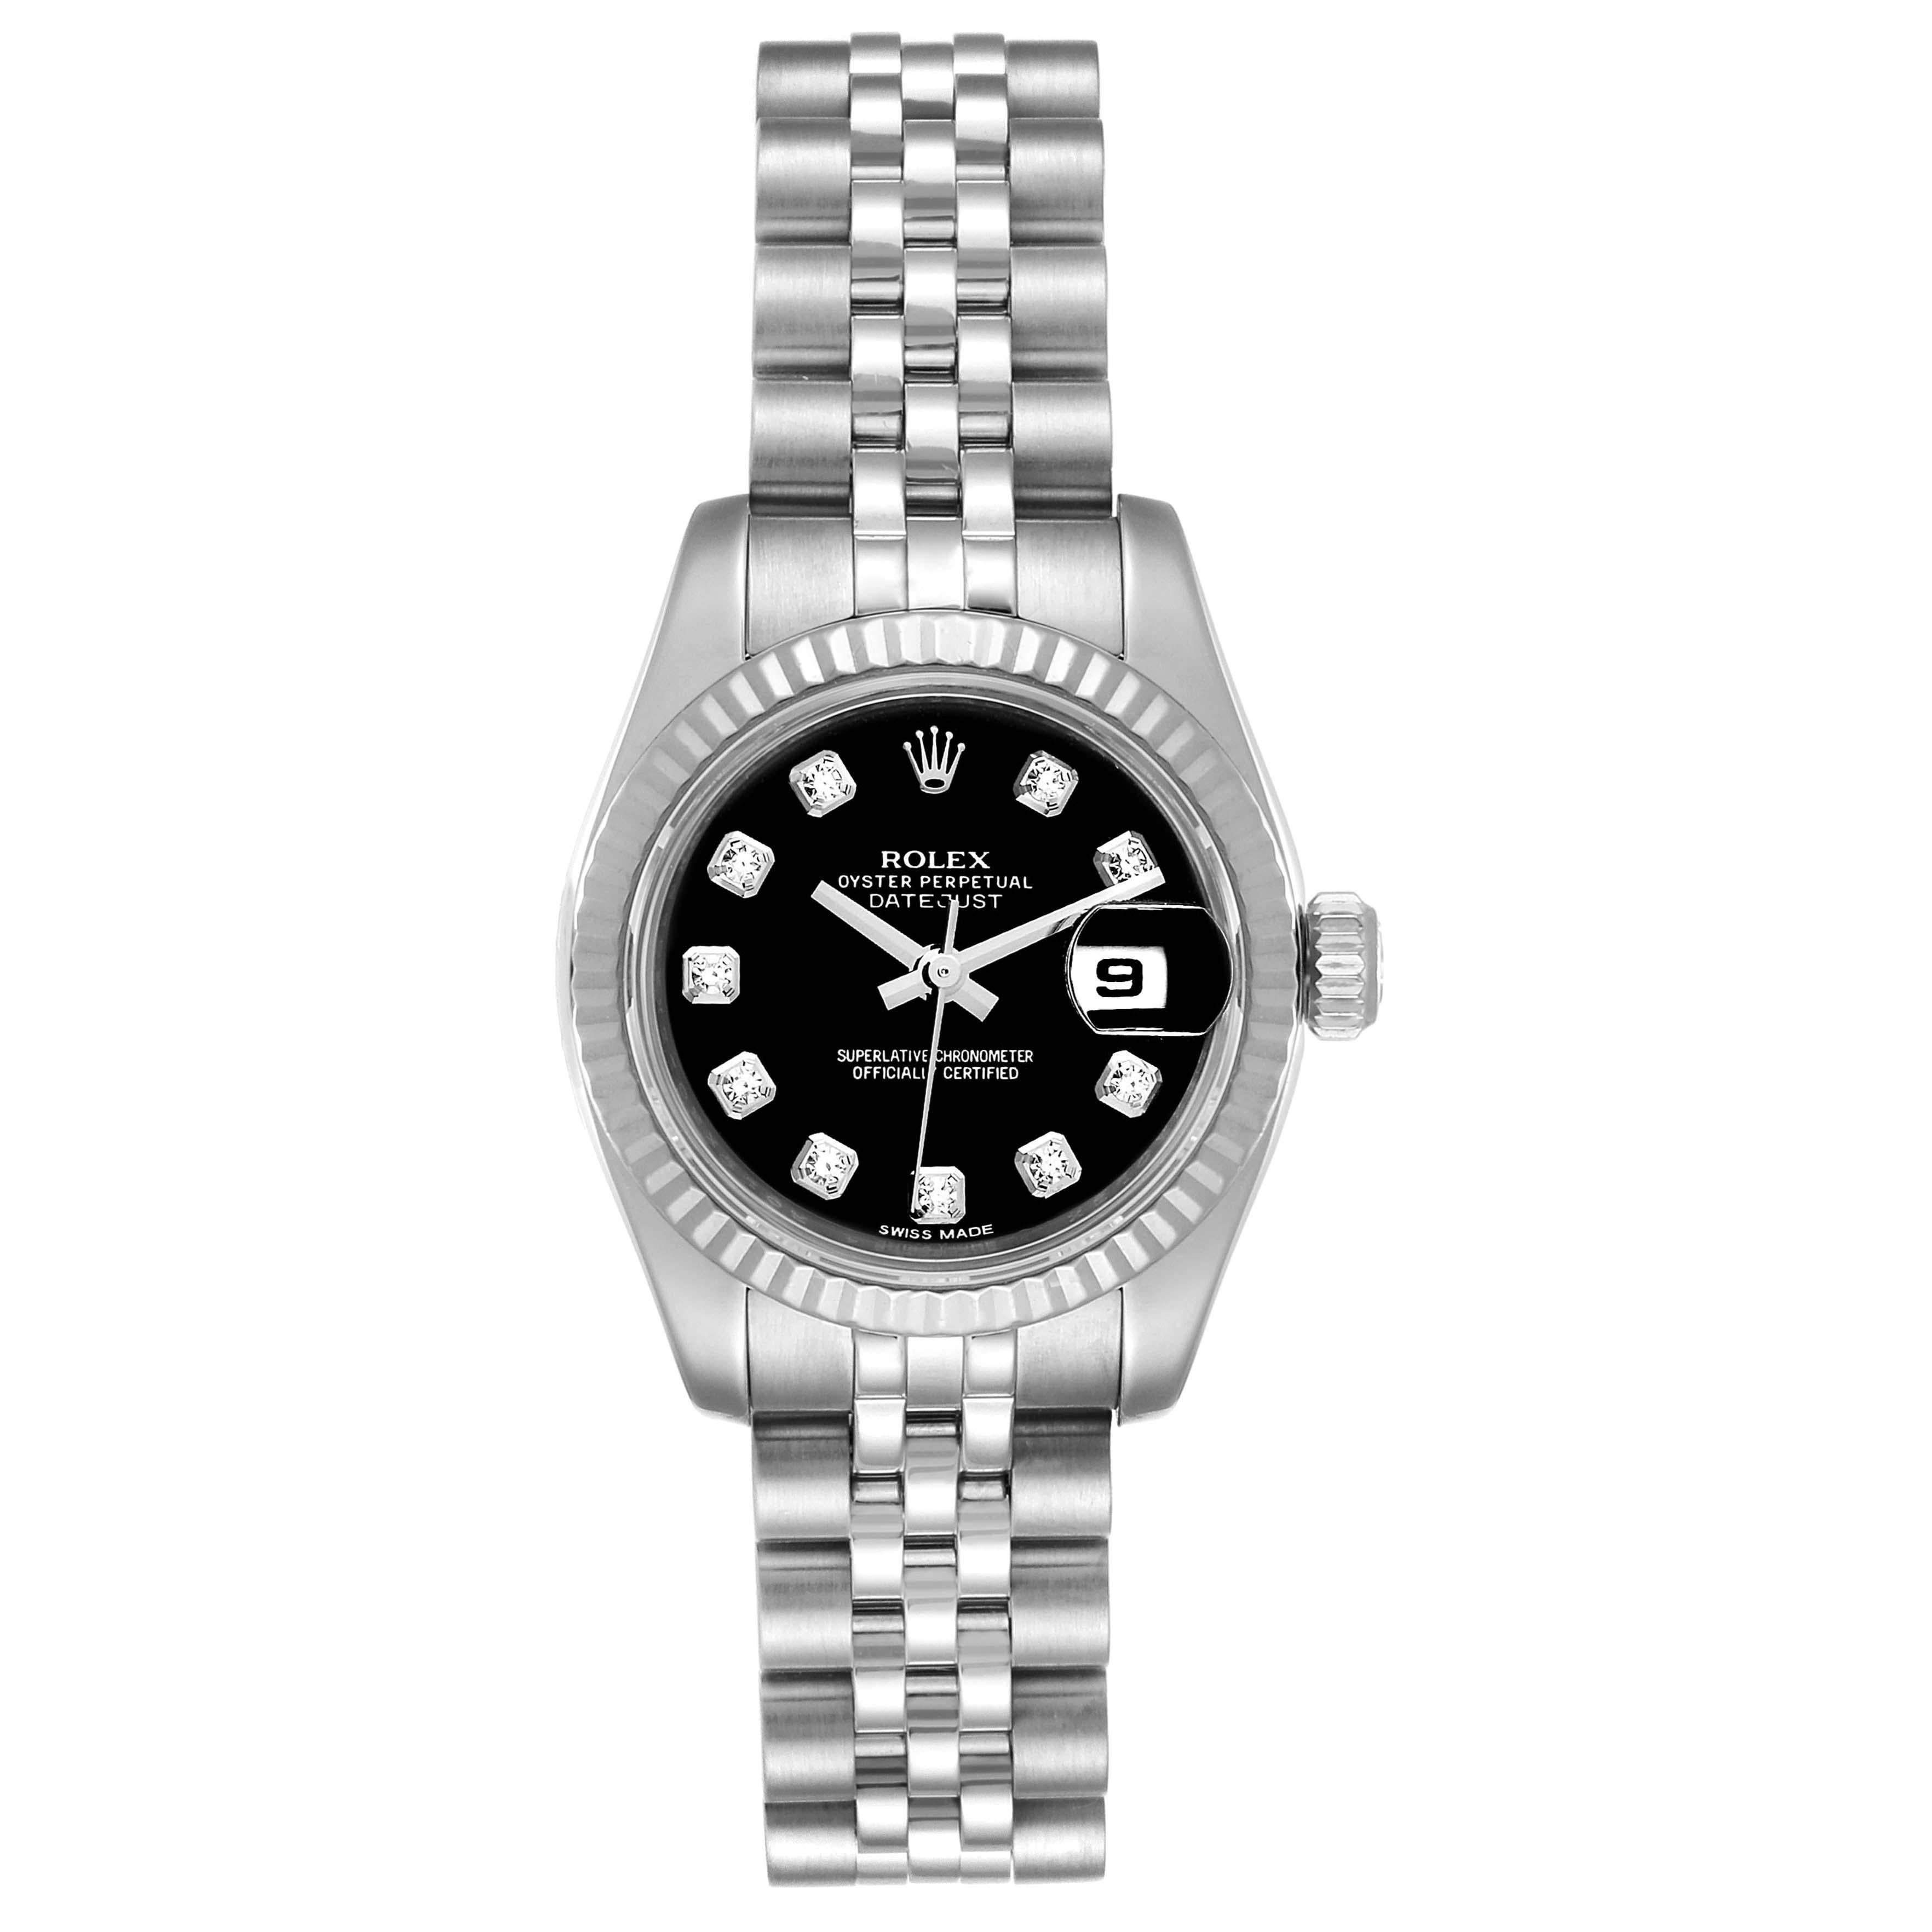 Rolex Datejust Steel White Gold Diamond Ladies Watch 79174 Box Card. Officially certified chronometer self-winding movement. Stainless steel oyster case 26.0 mm in diameter. Rolex logo on a crown. 18k white gold fluted bezel. Scratch resistant